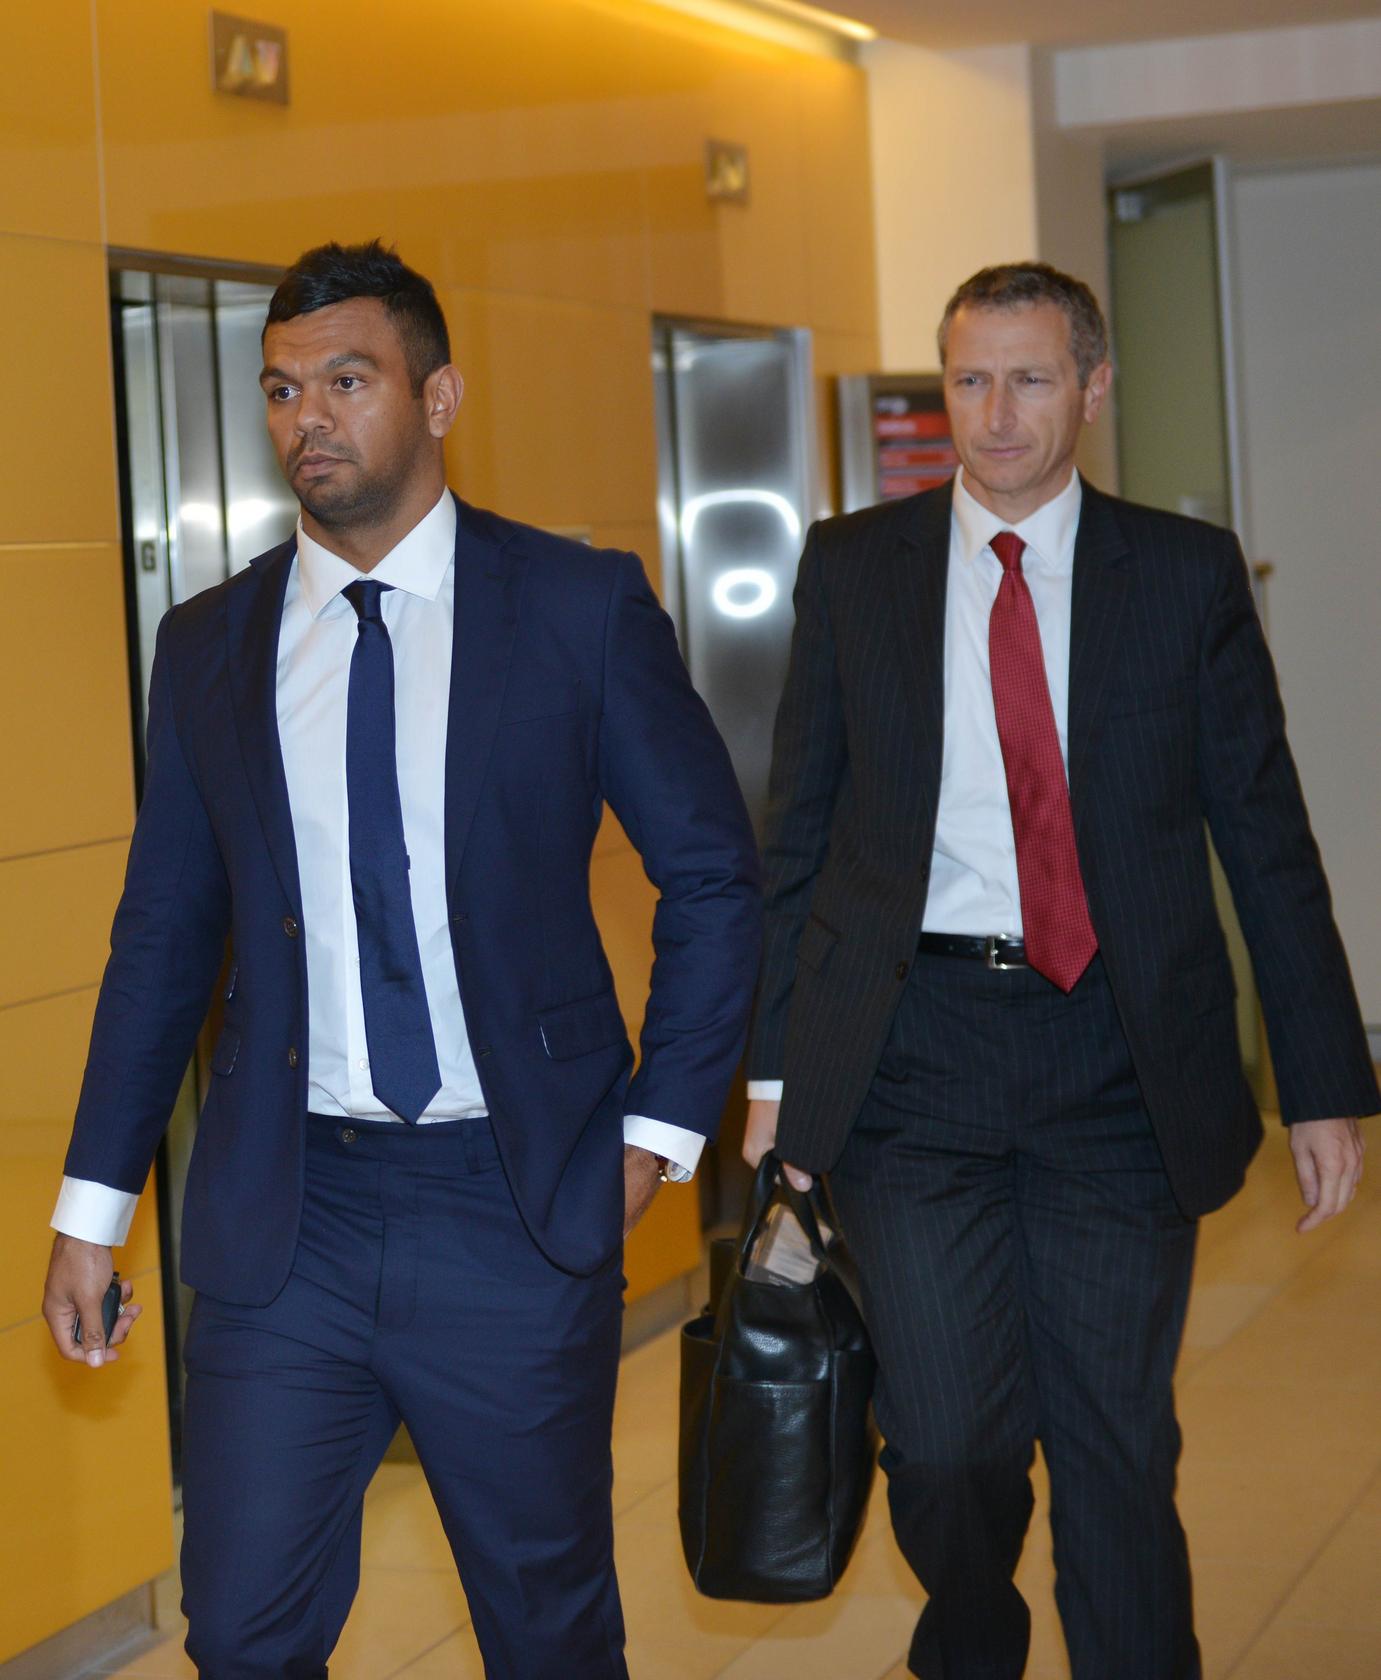 Wallabies star Kurtley Beale has paid a total of A$94,500 in fines for five incidents since 2007. Photos: AFP 
